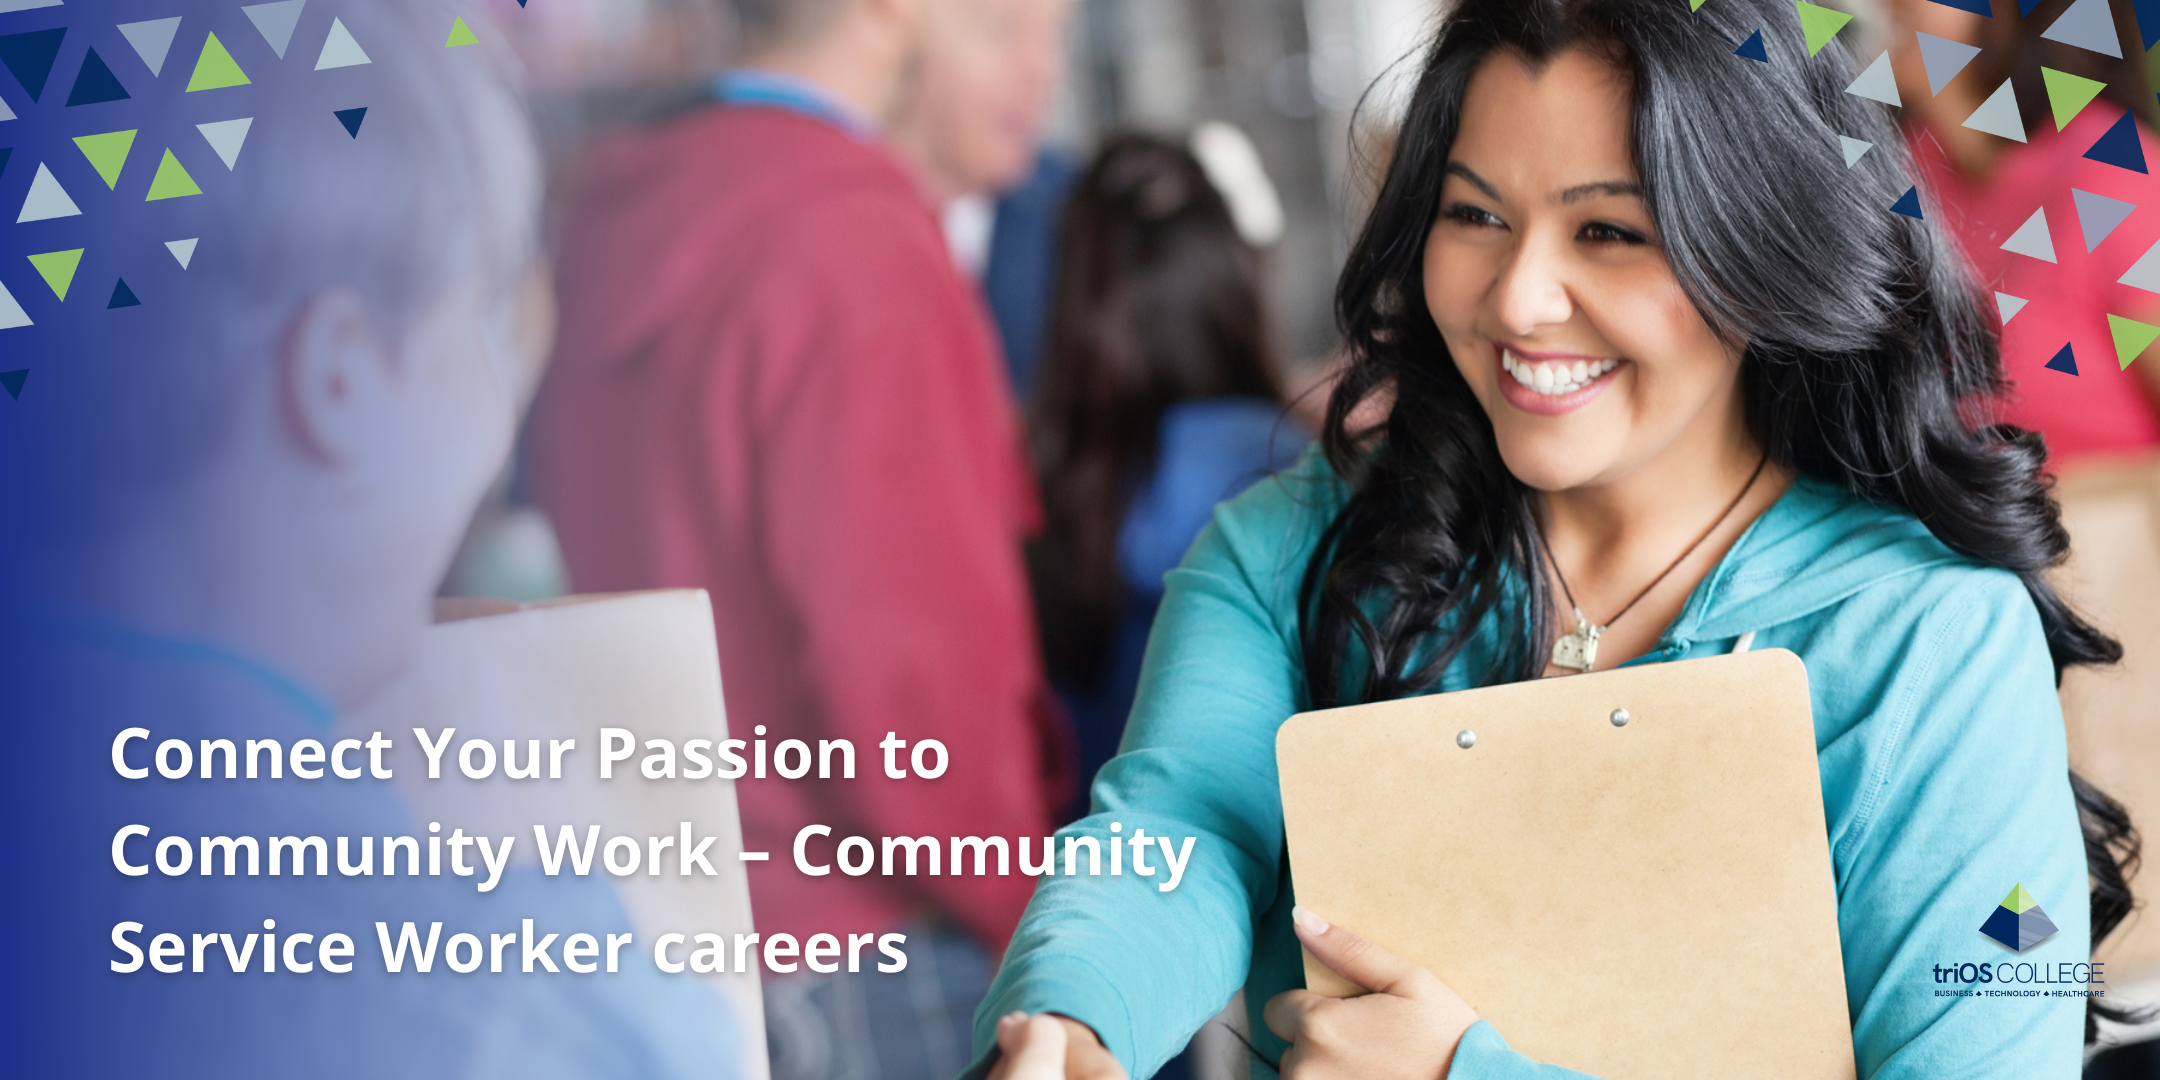 Connect Your Passion to Community Work into a Career featured image